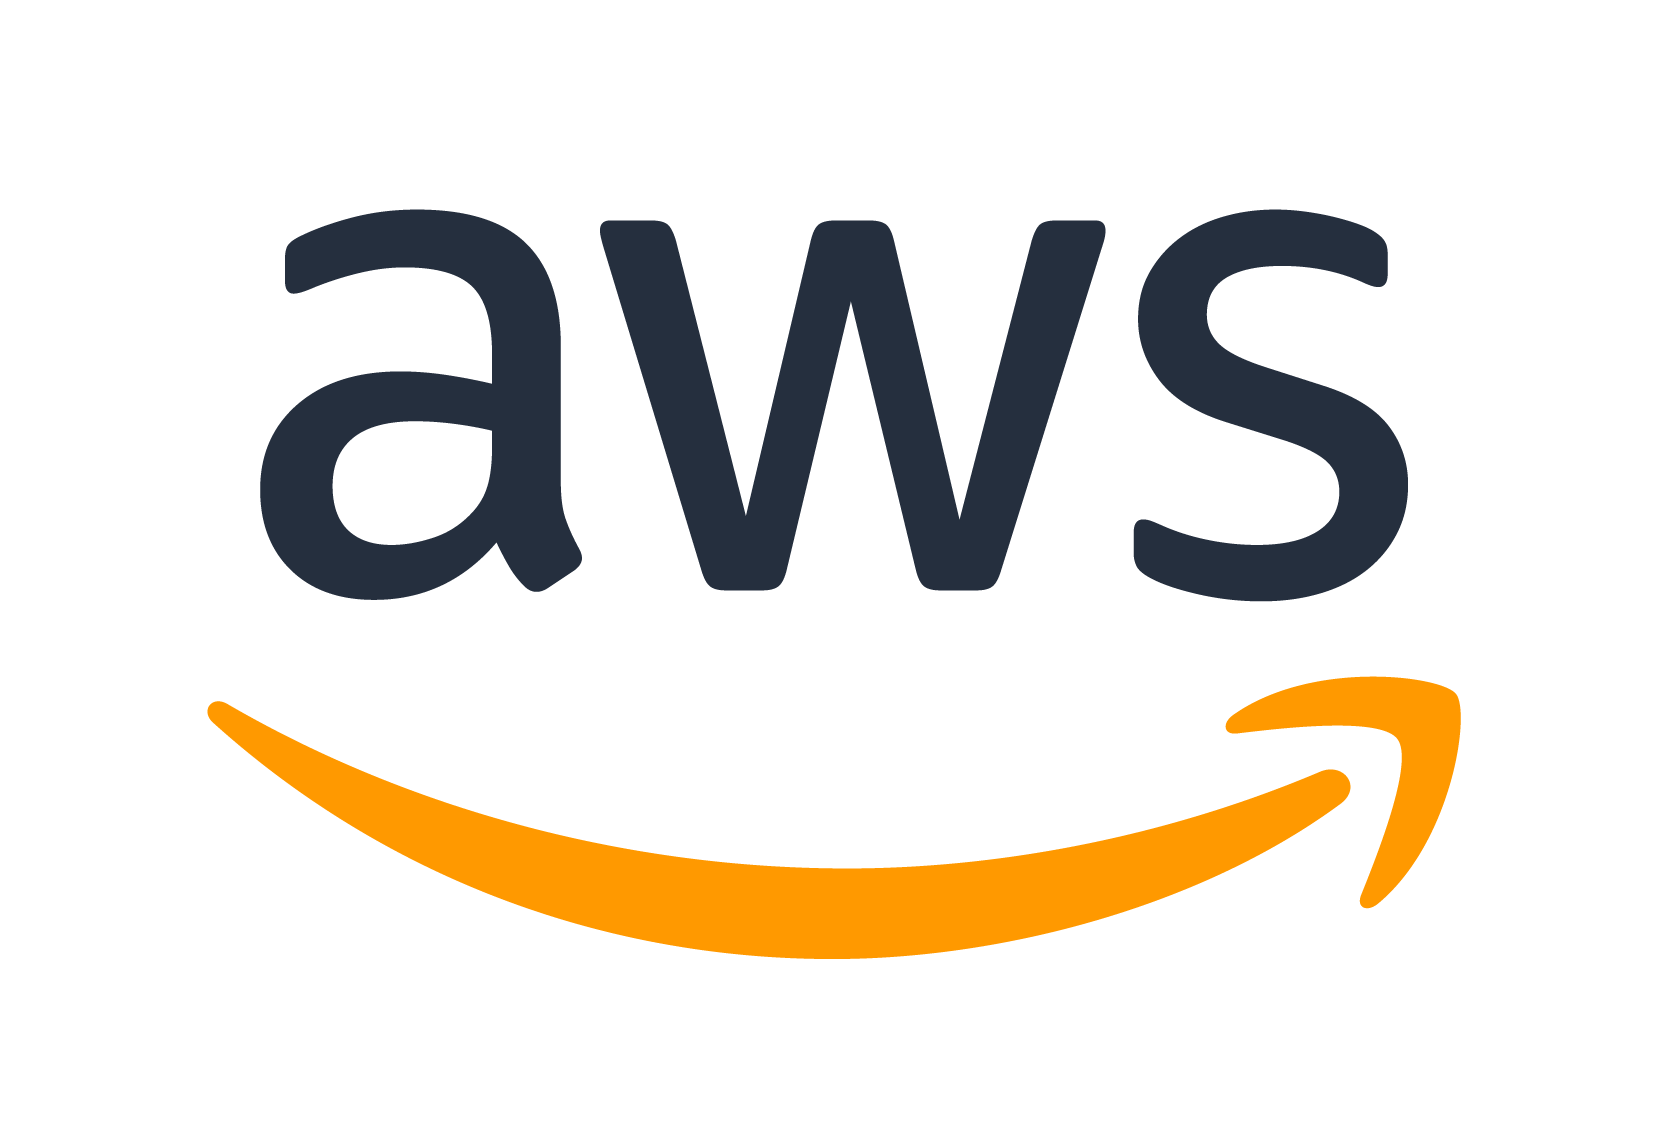 AWS Managed Service